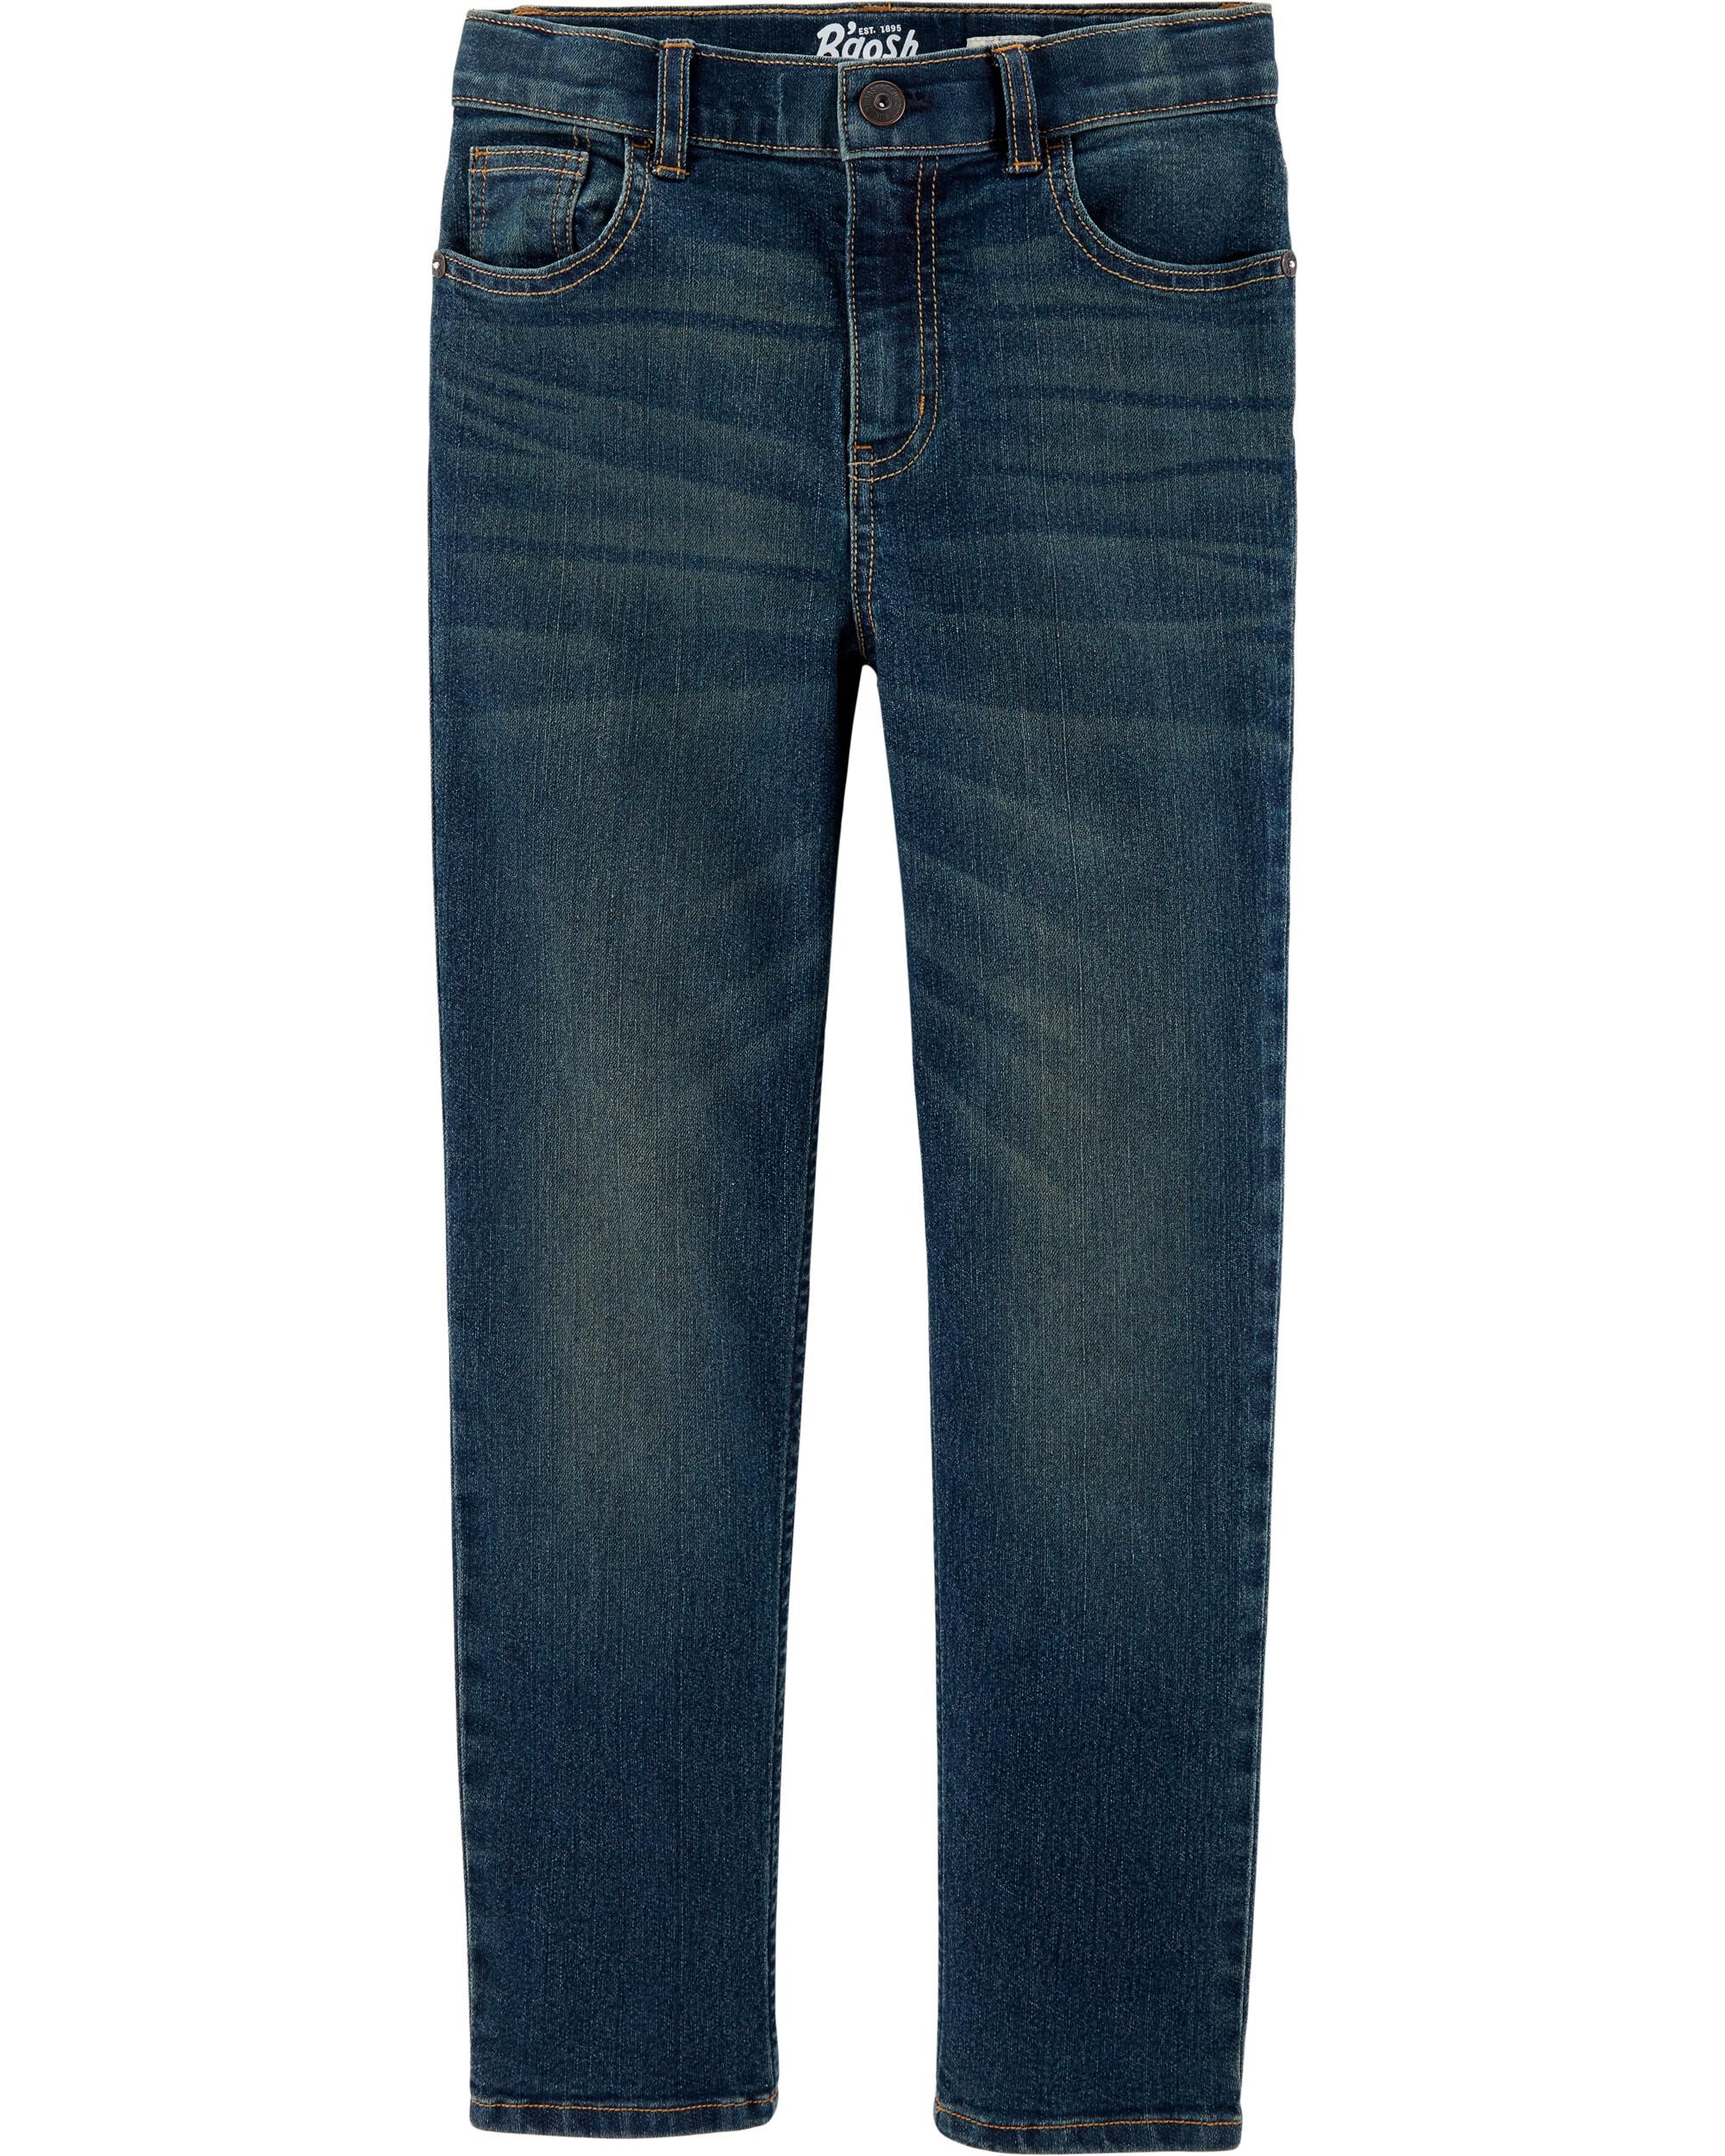 Carters Straight Jeans in Authentic Tint